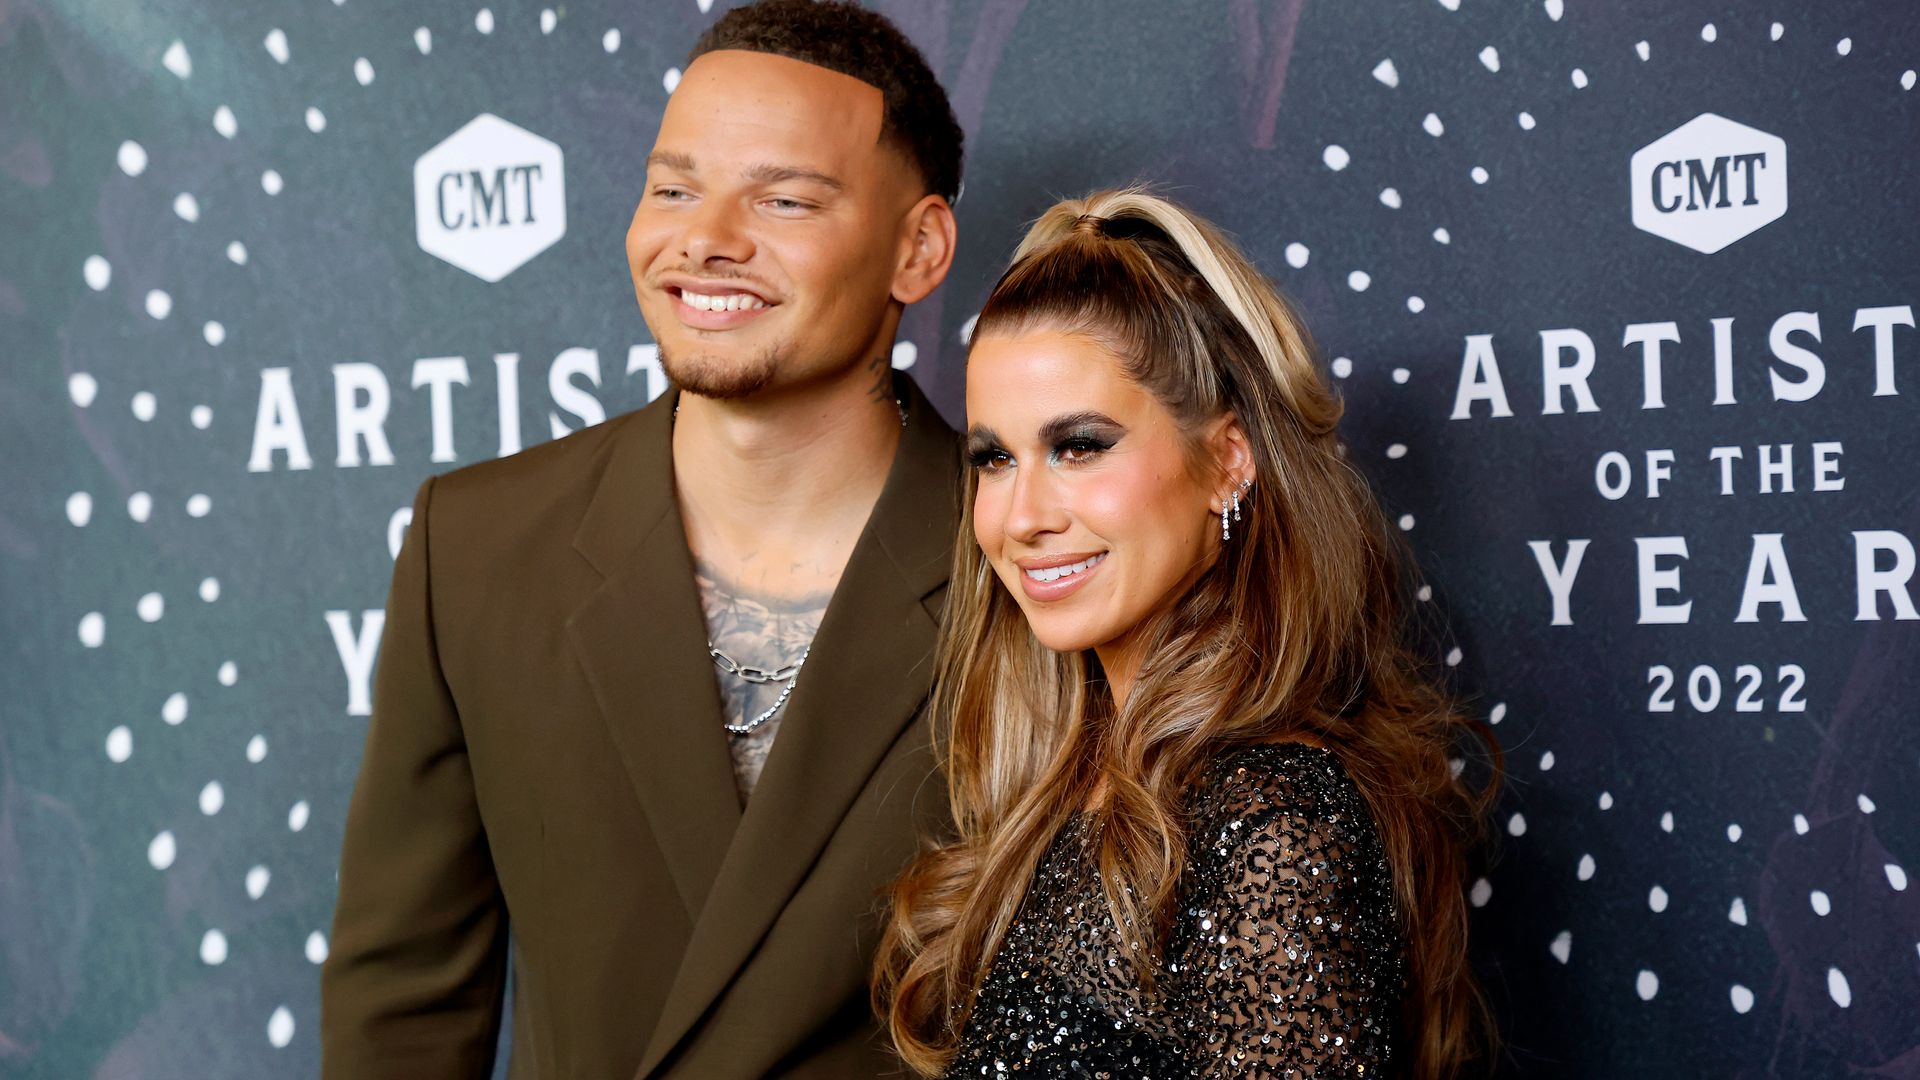 Kane Brown and  Katelyn Jae Brown attend the 2022 CMT Artists Of The Year ceremony